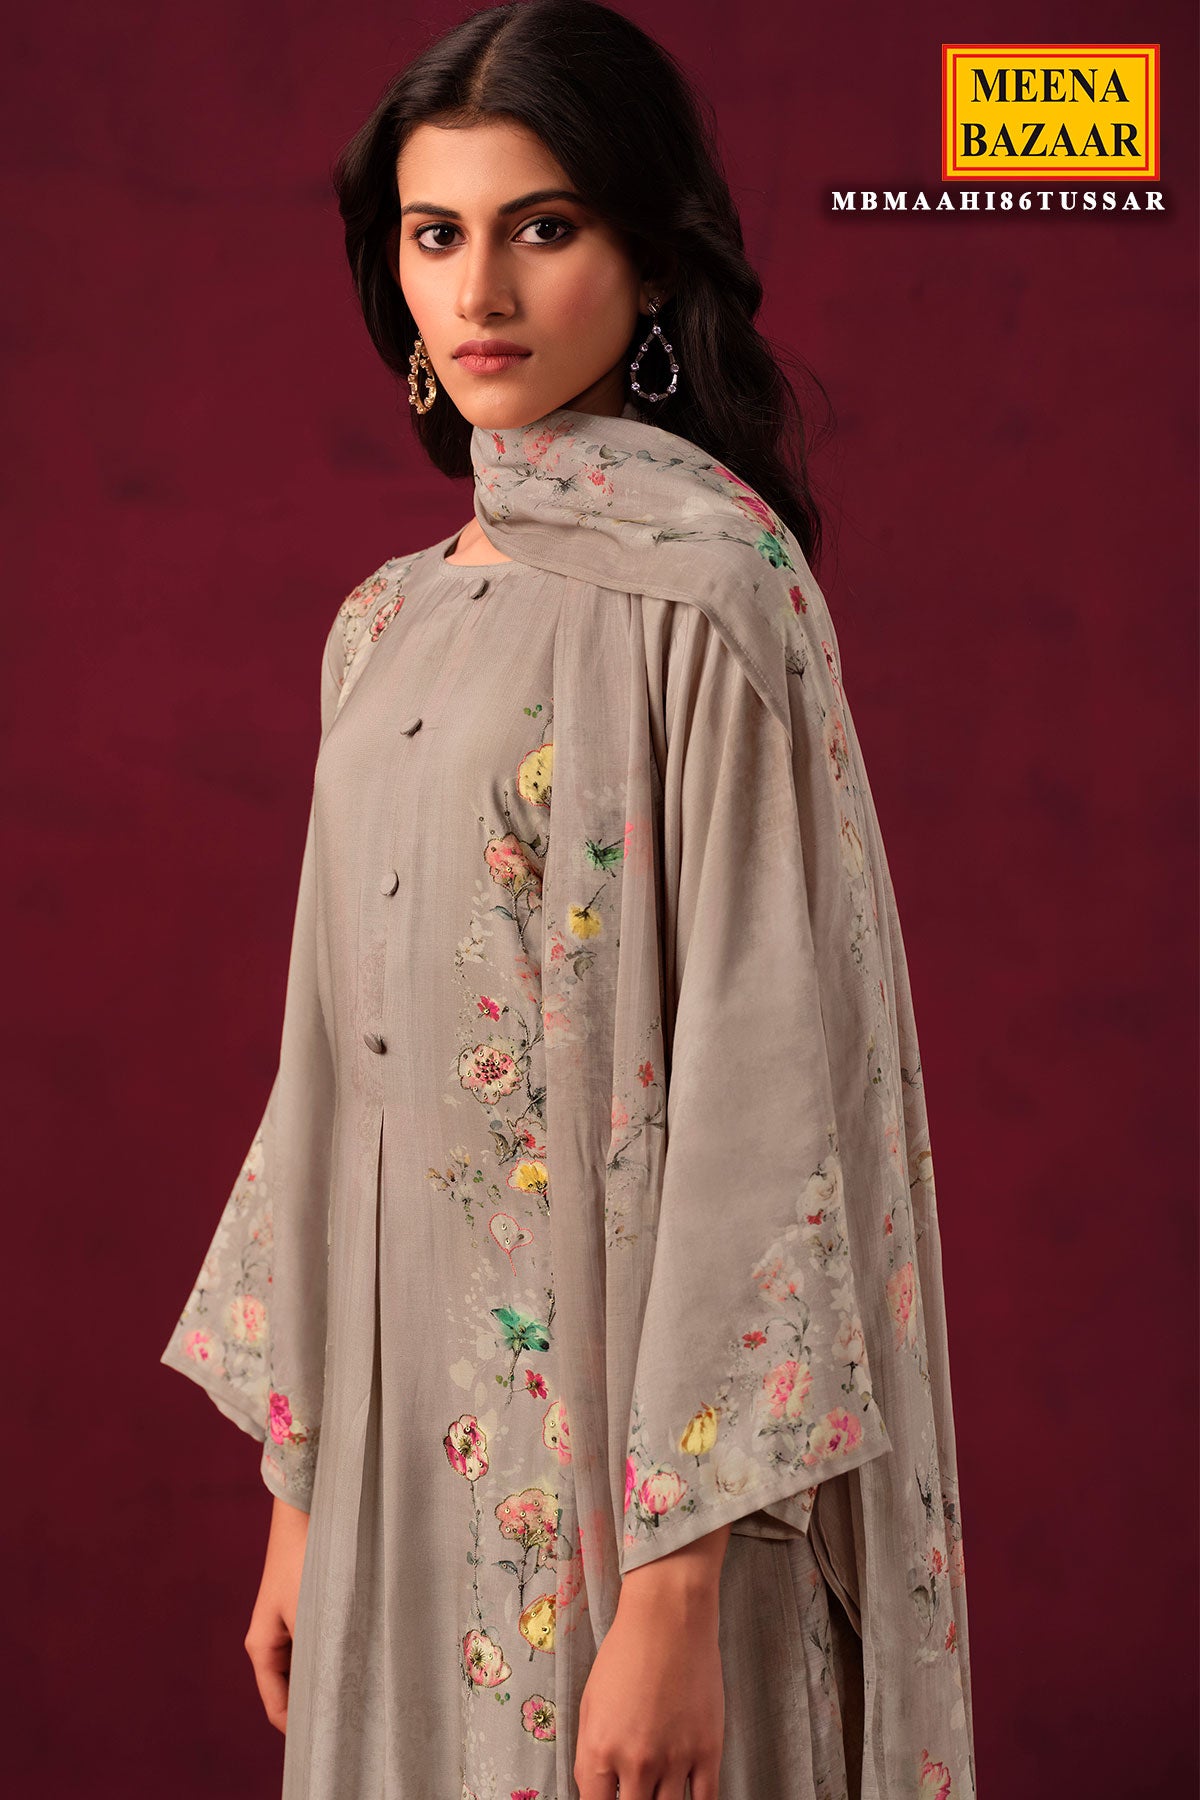 Tussar Muslin Floral Printed Suit Set with Threadwork Embroidery